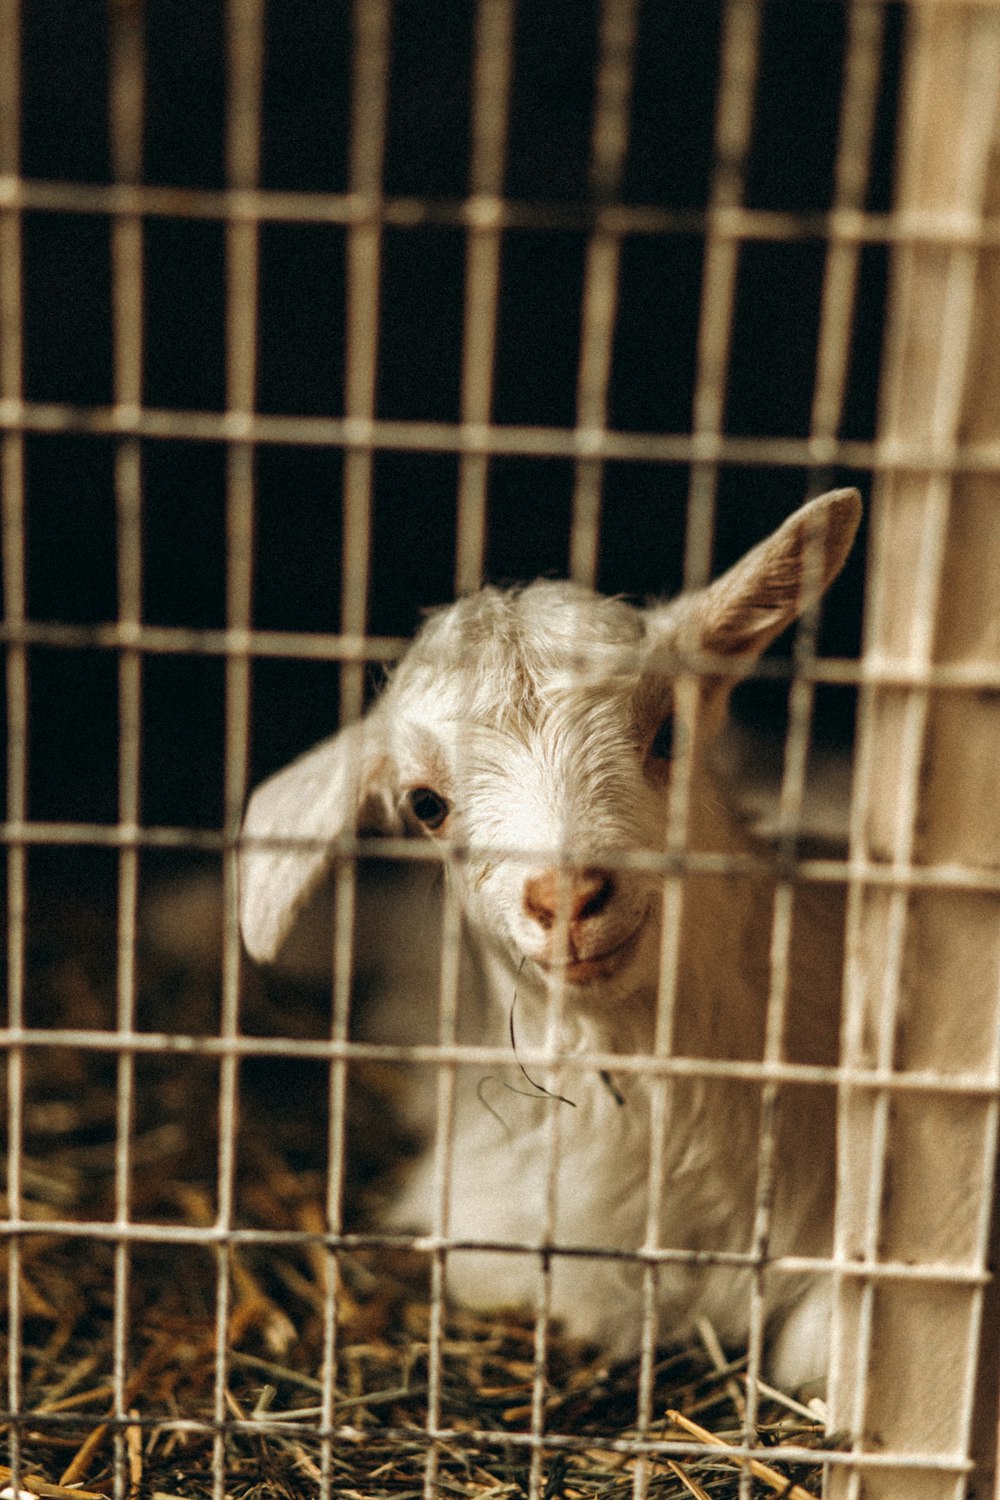 white goat in cage during daytime